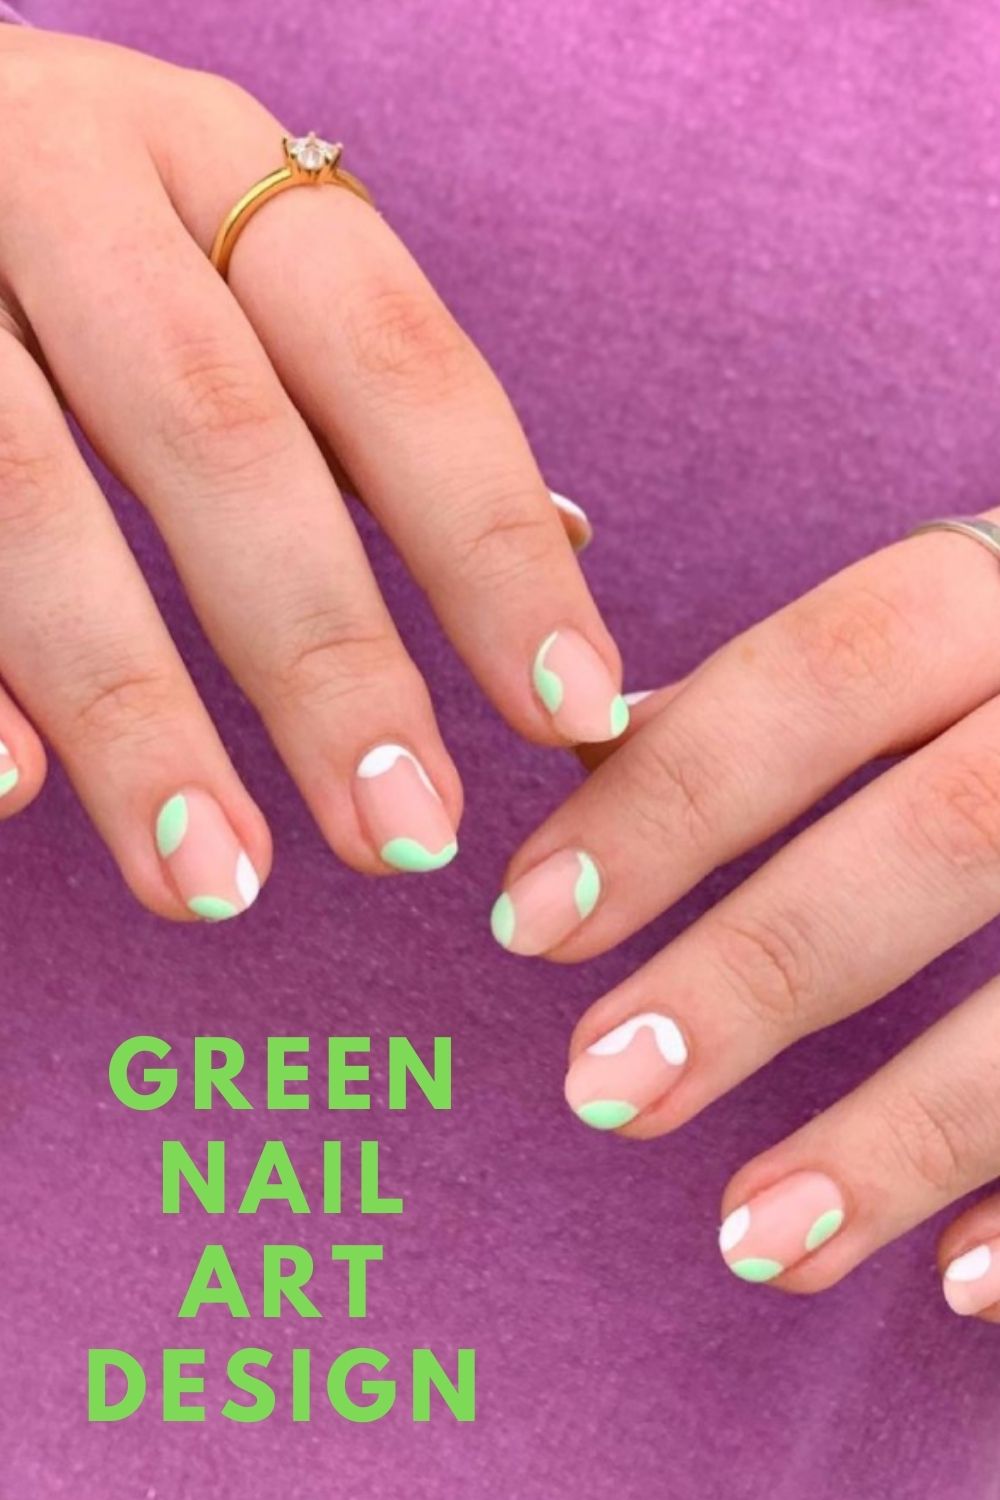 Neon green and white short nails